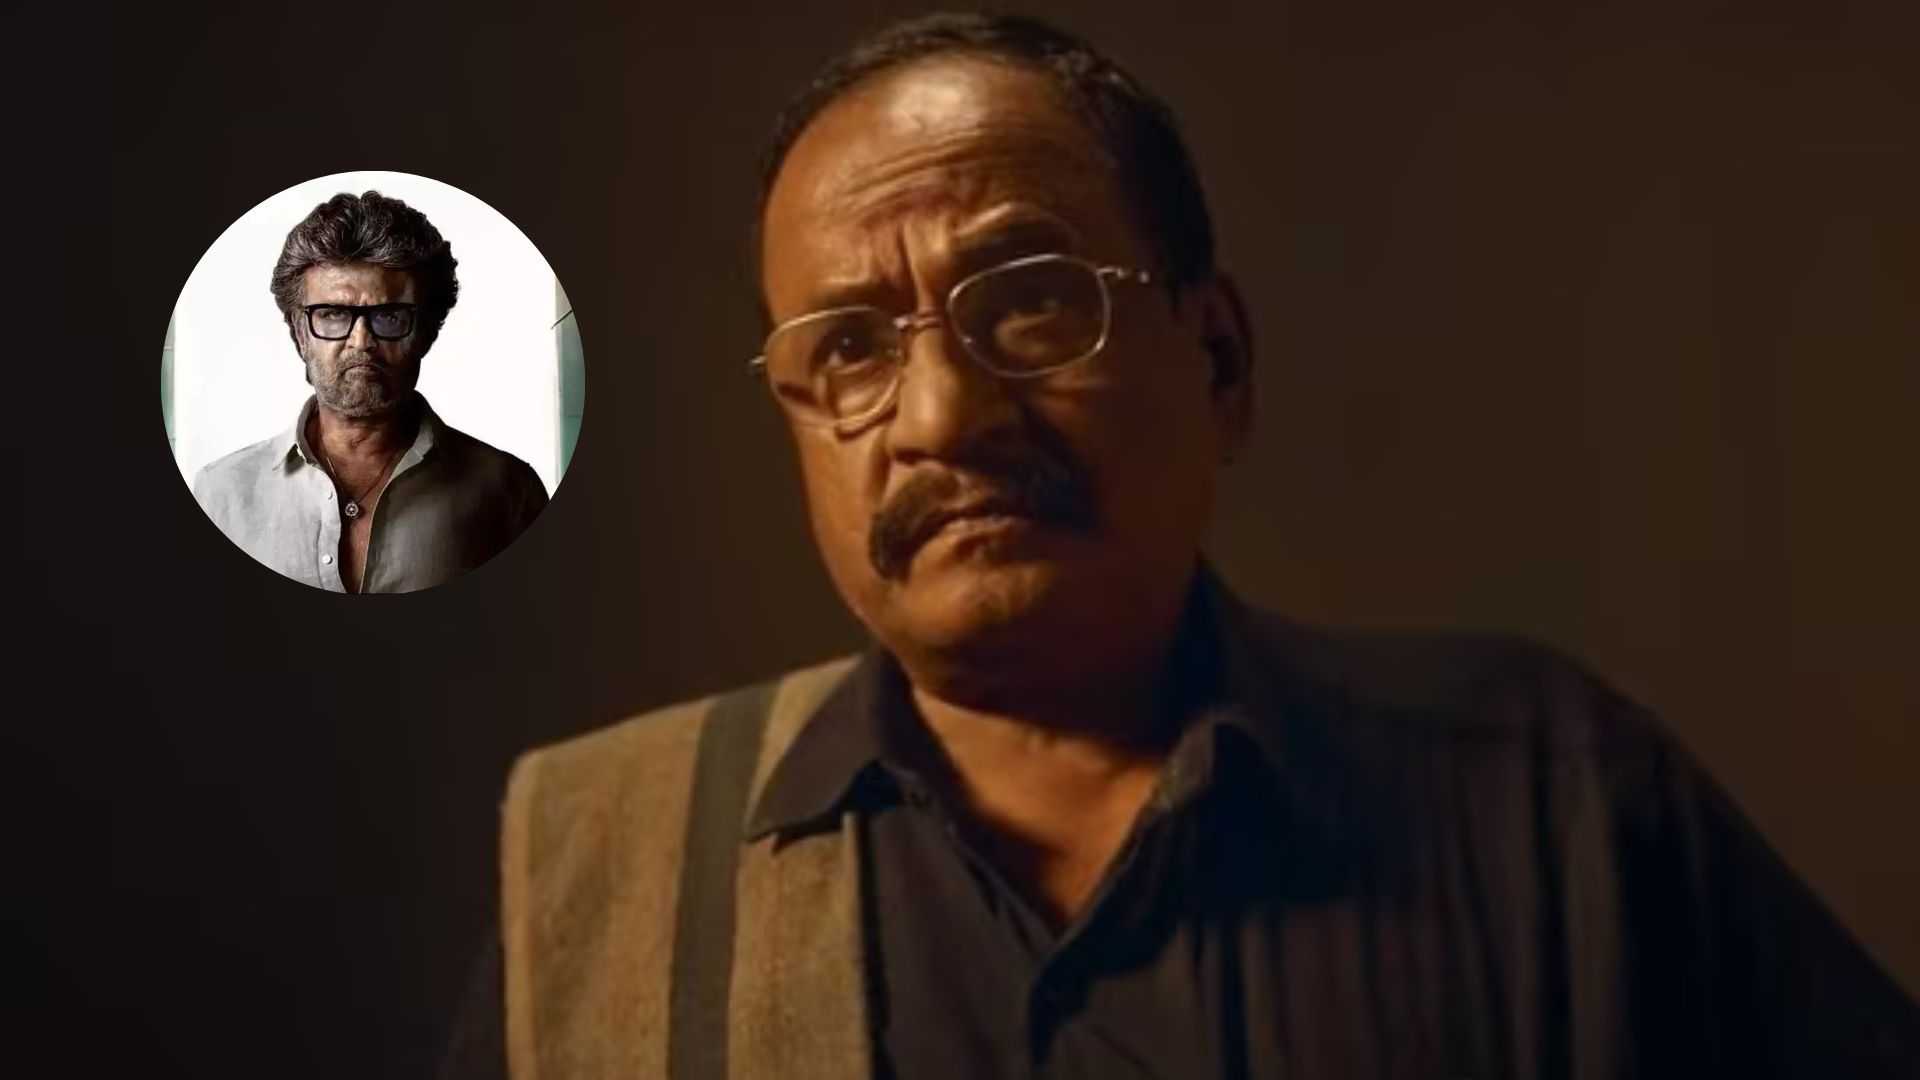 Rajinikanth's Jailer co-star G Marimuthu passes away after suffering a heart attack